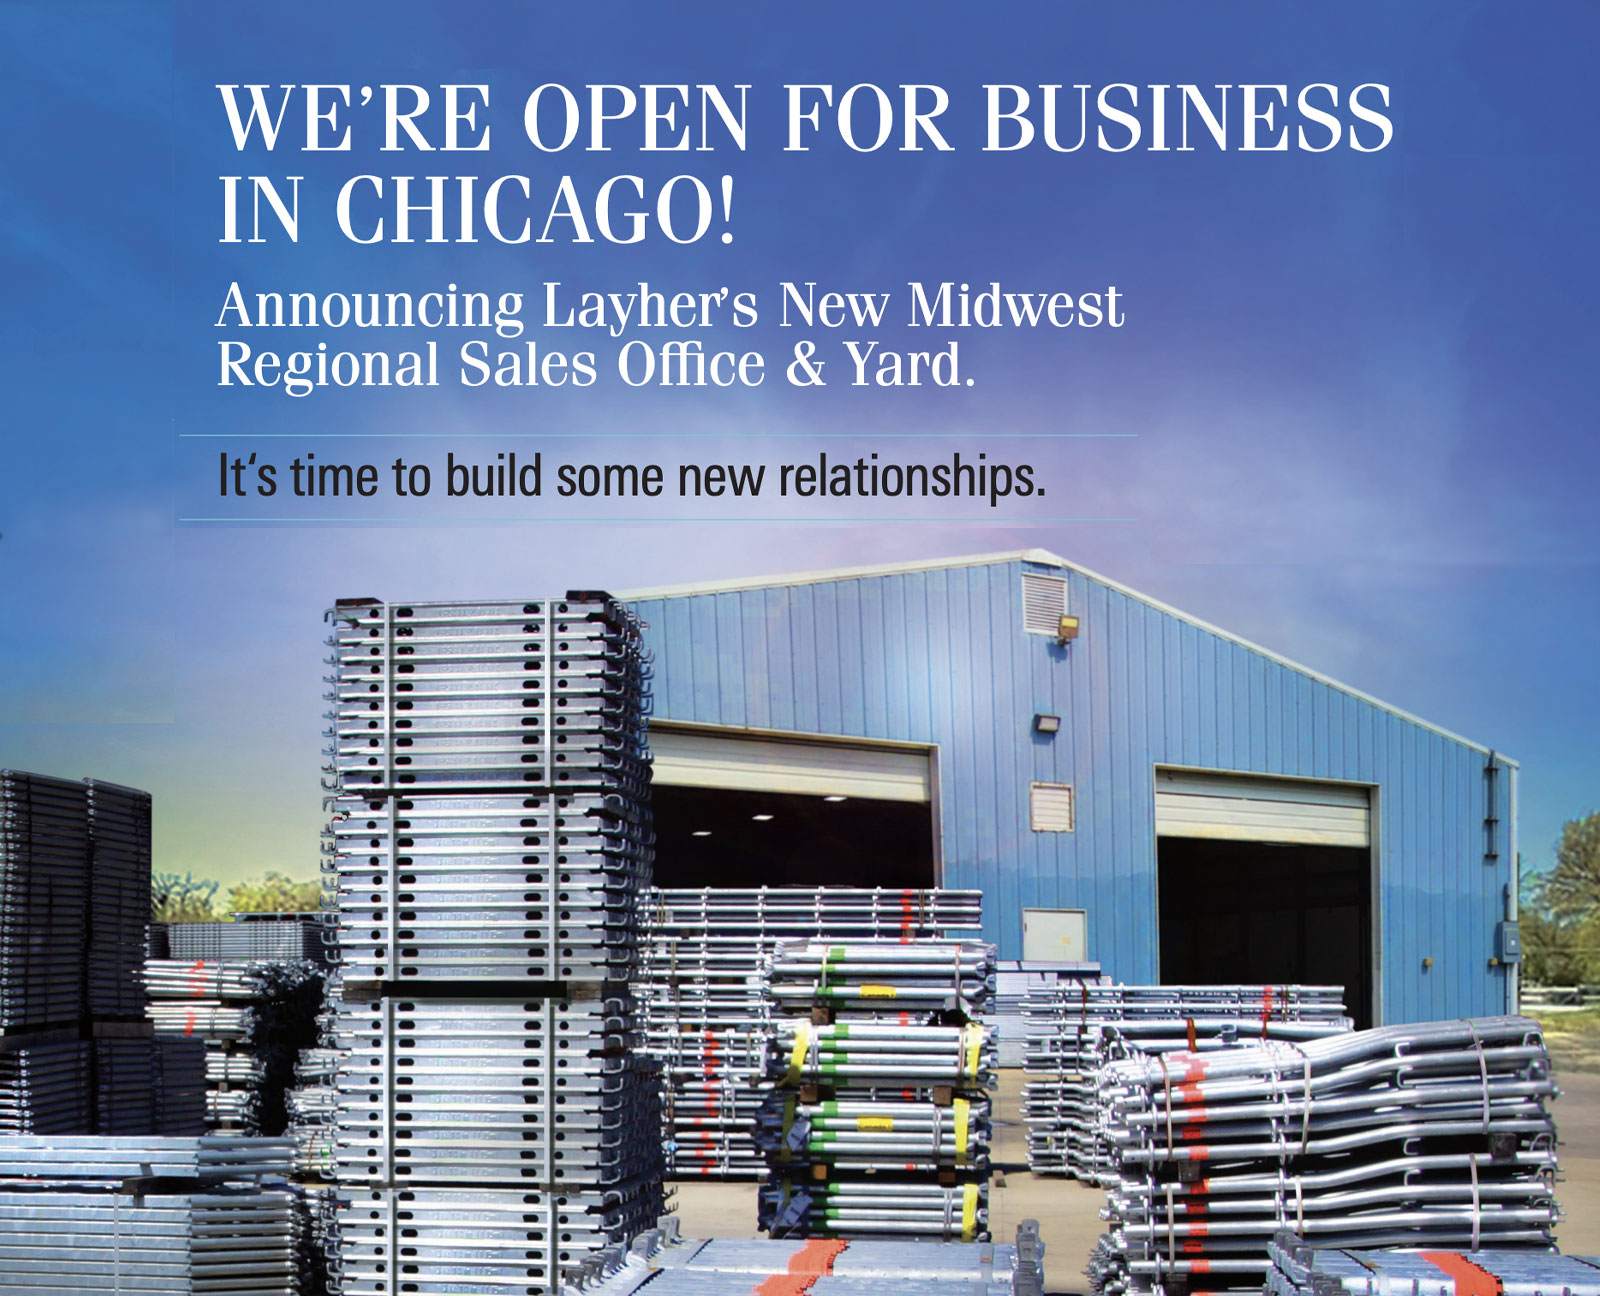 New Midwest Regional Sales Office